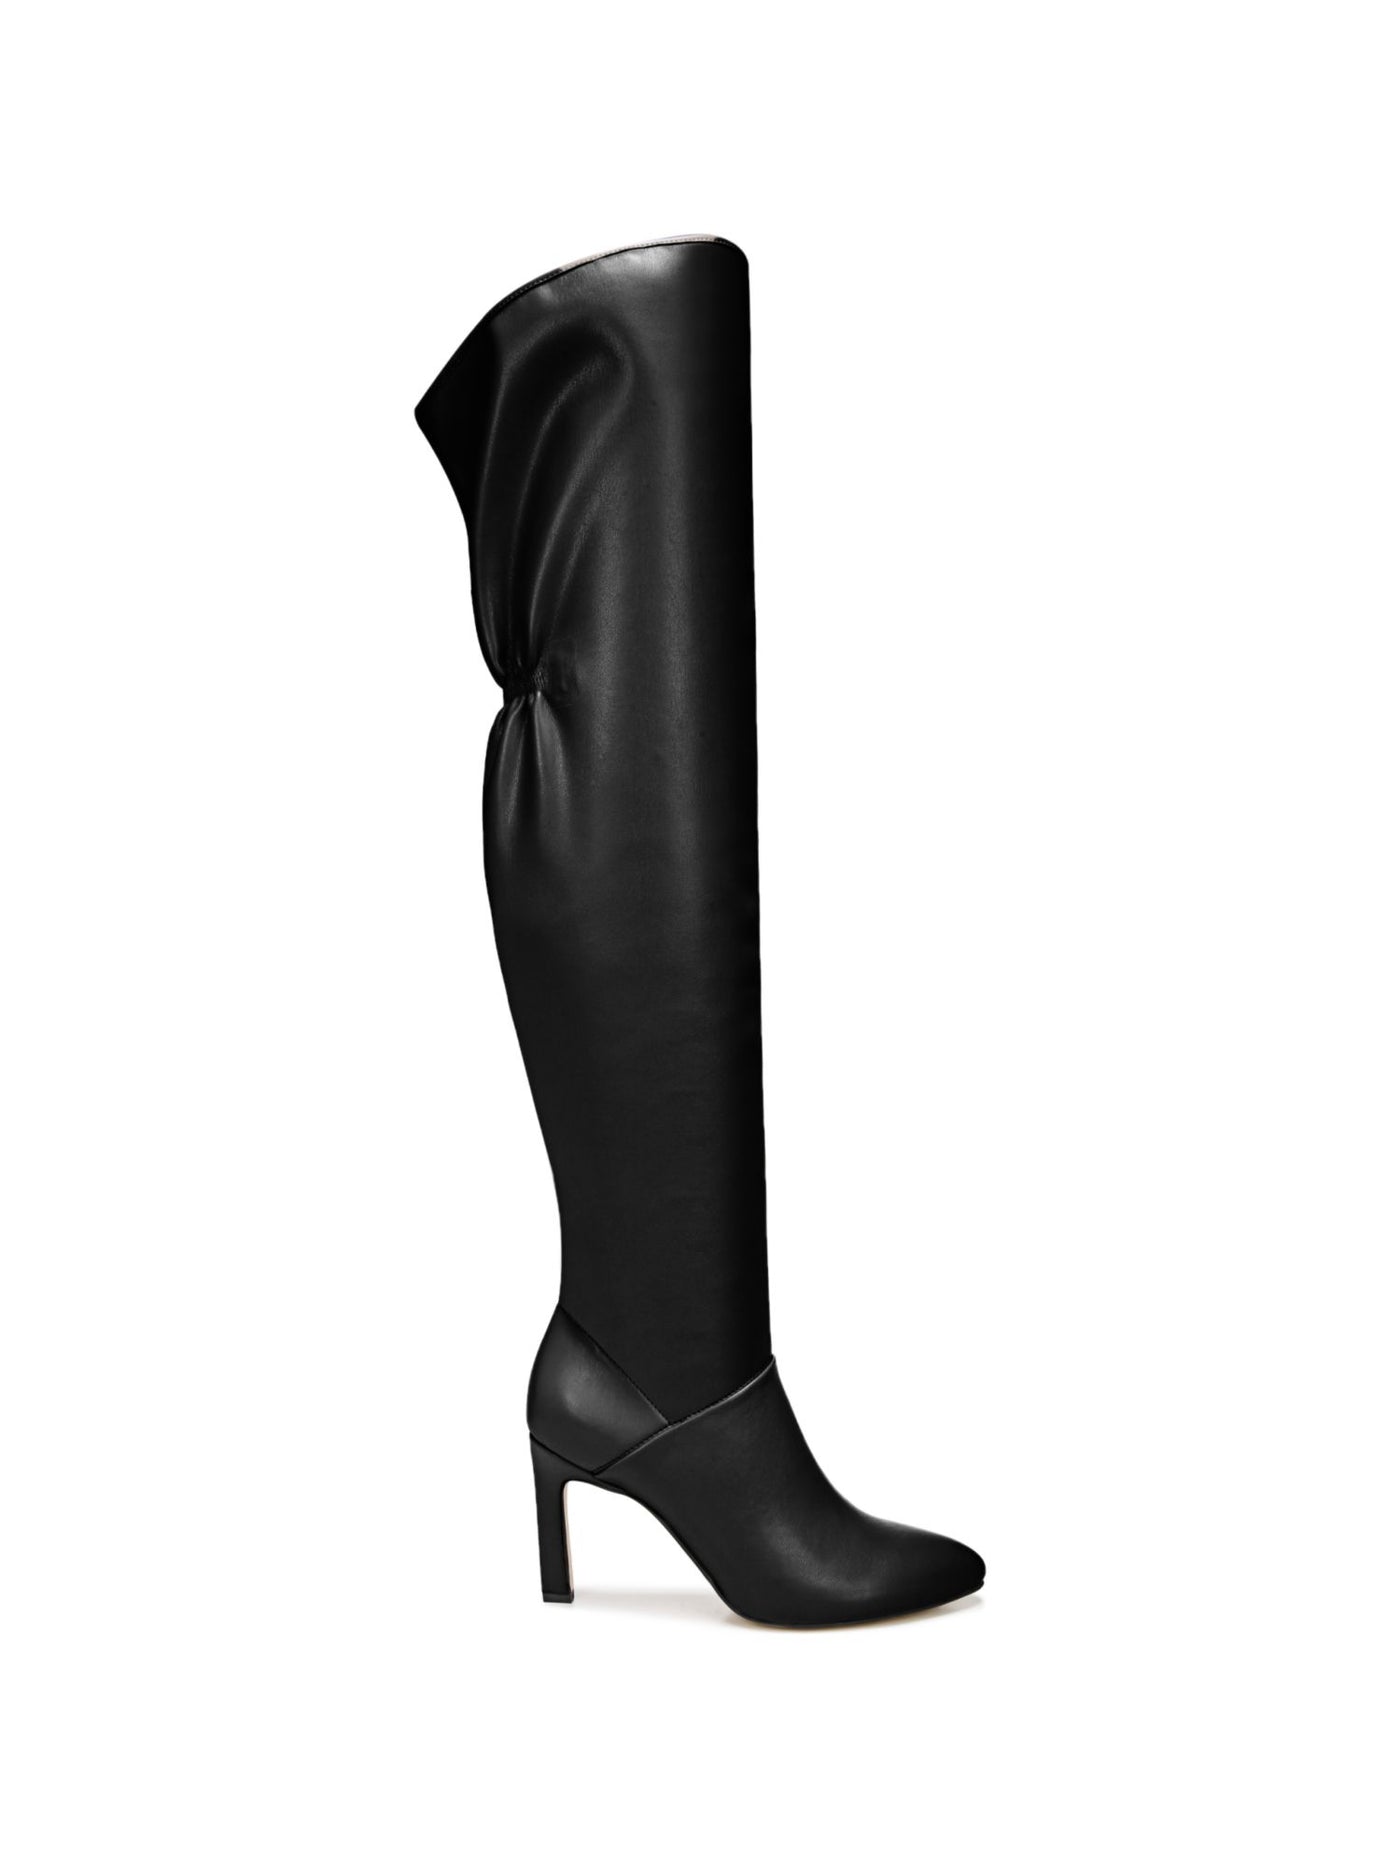 SARTO Womens Black Padded Callie 2 Pointed Toe Stiletto Zip-Up Heeled Boots 7 M